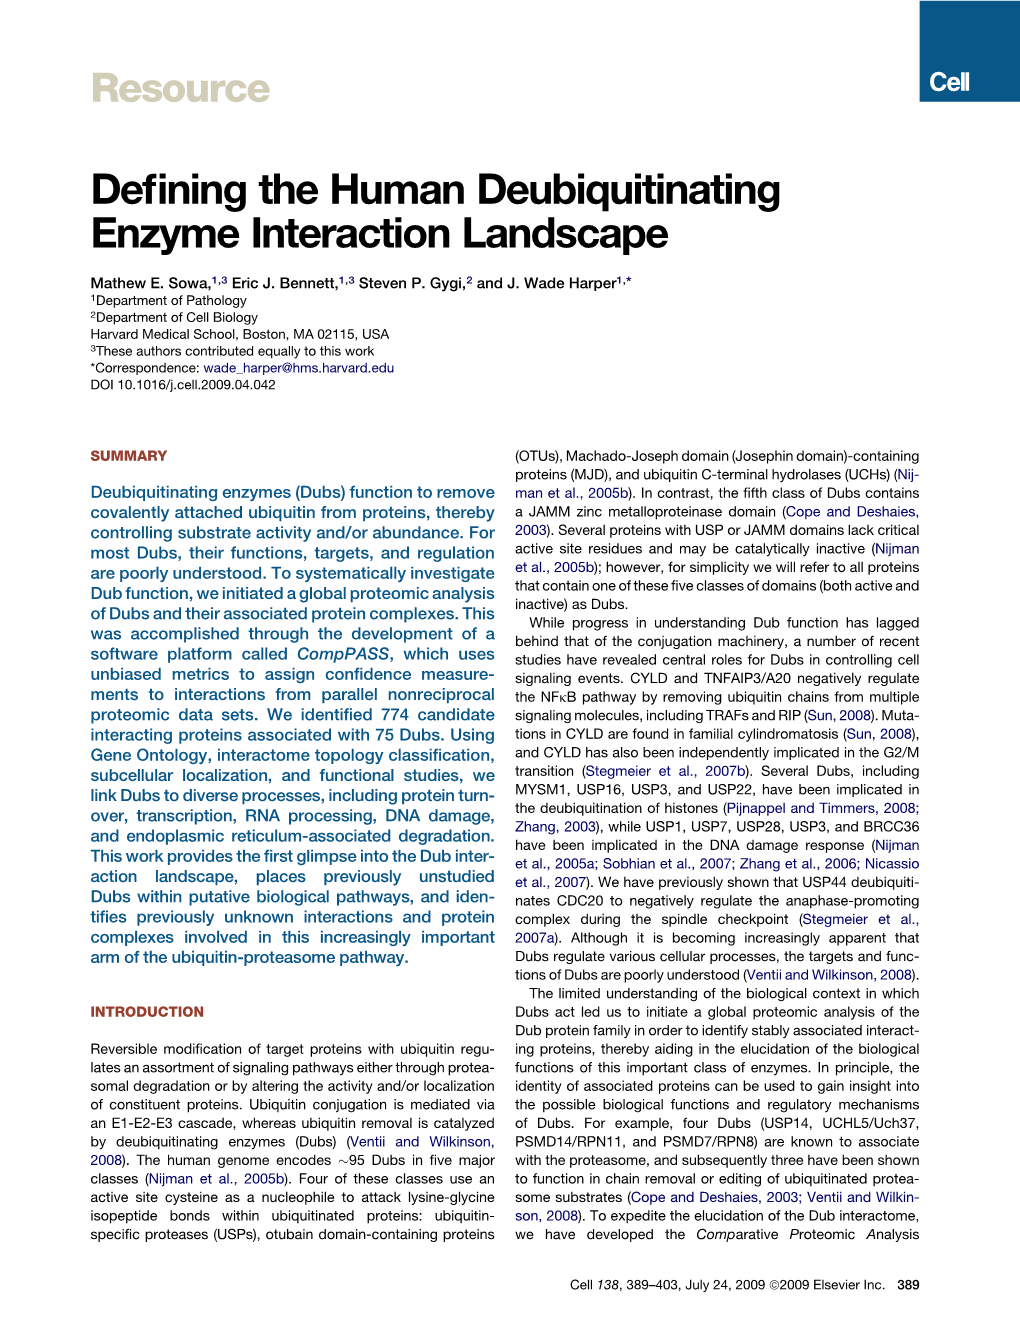 Defining the Human Deubiquitinating Enzyme Interaction Landscape